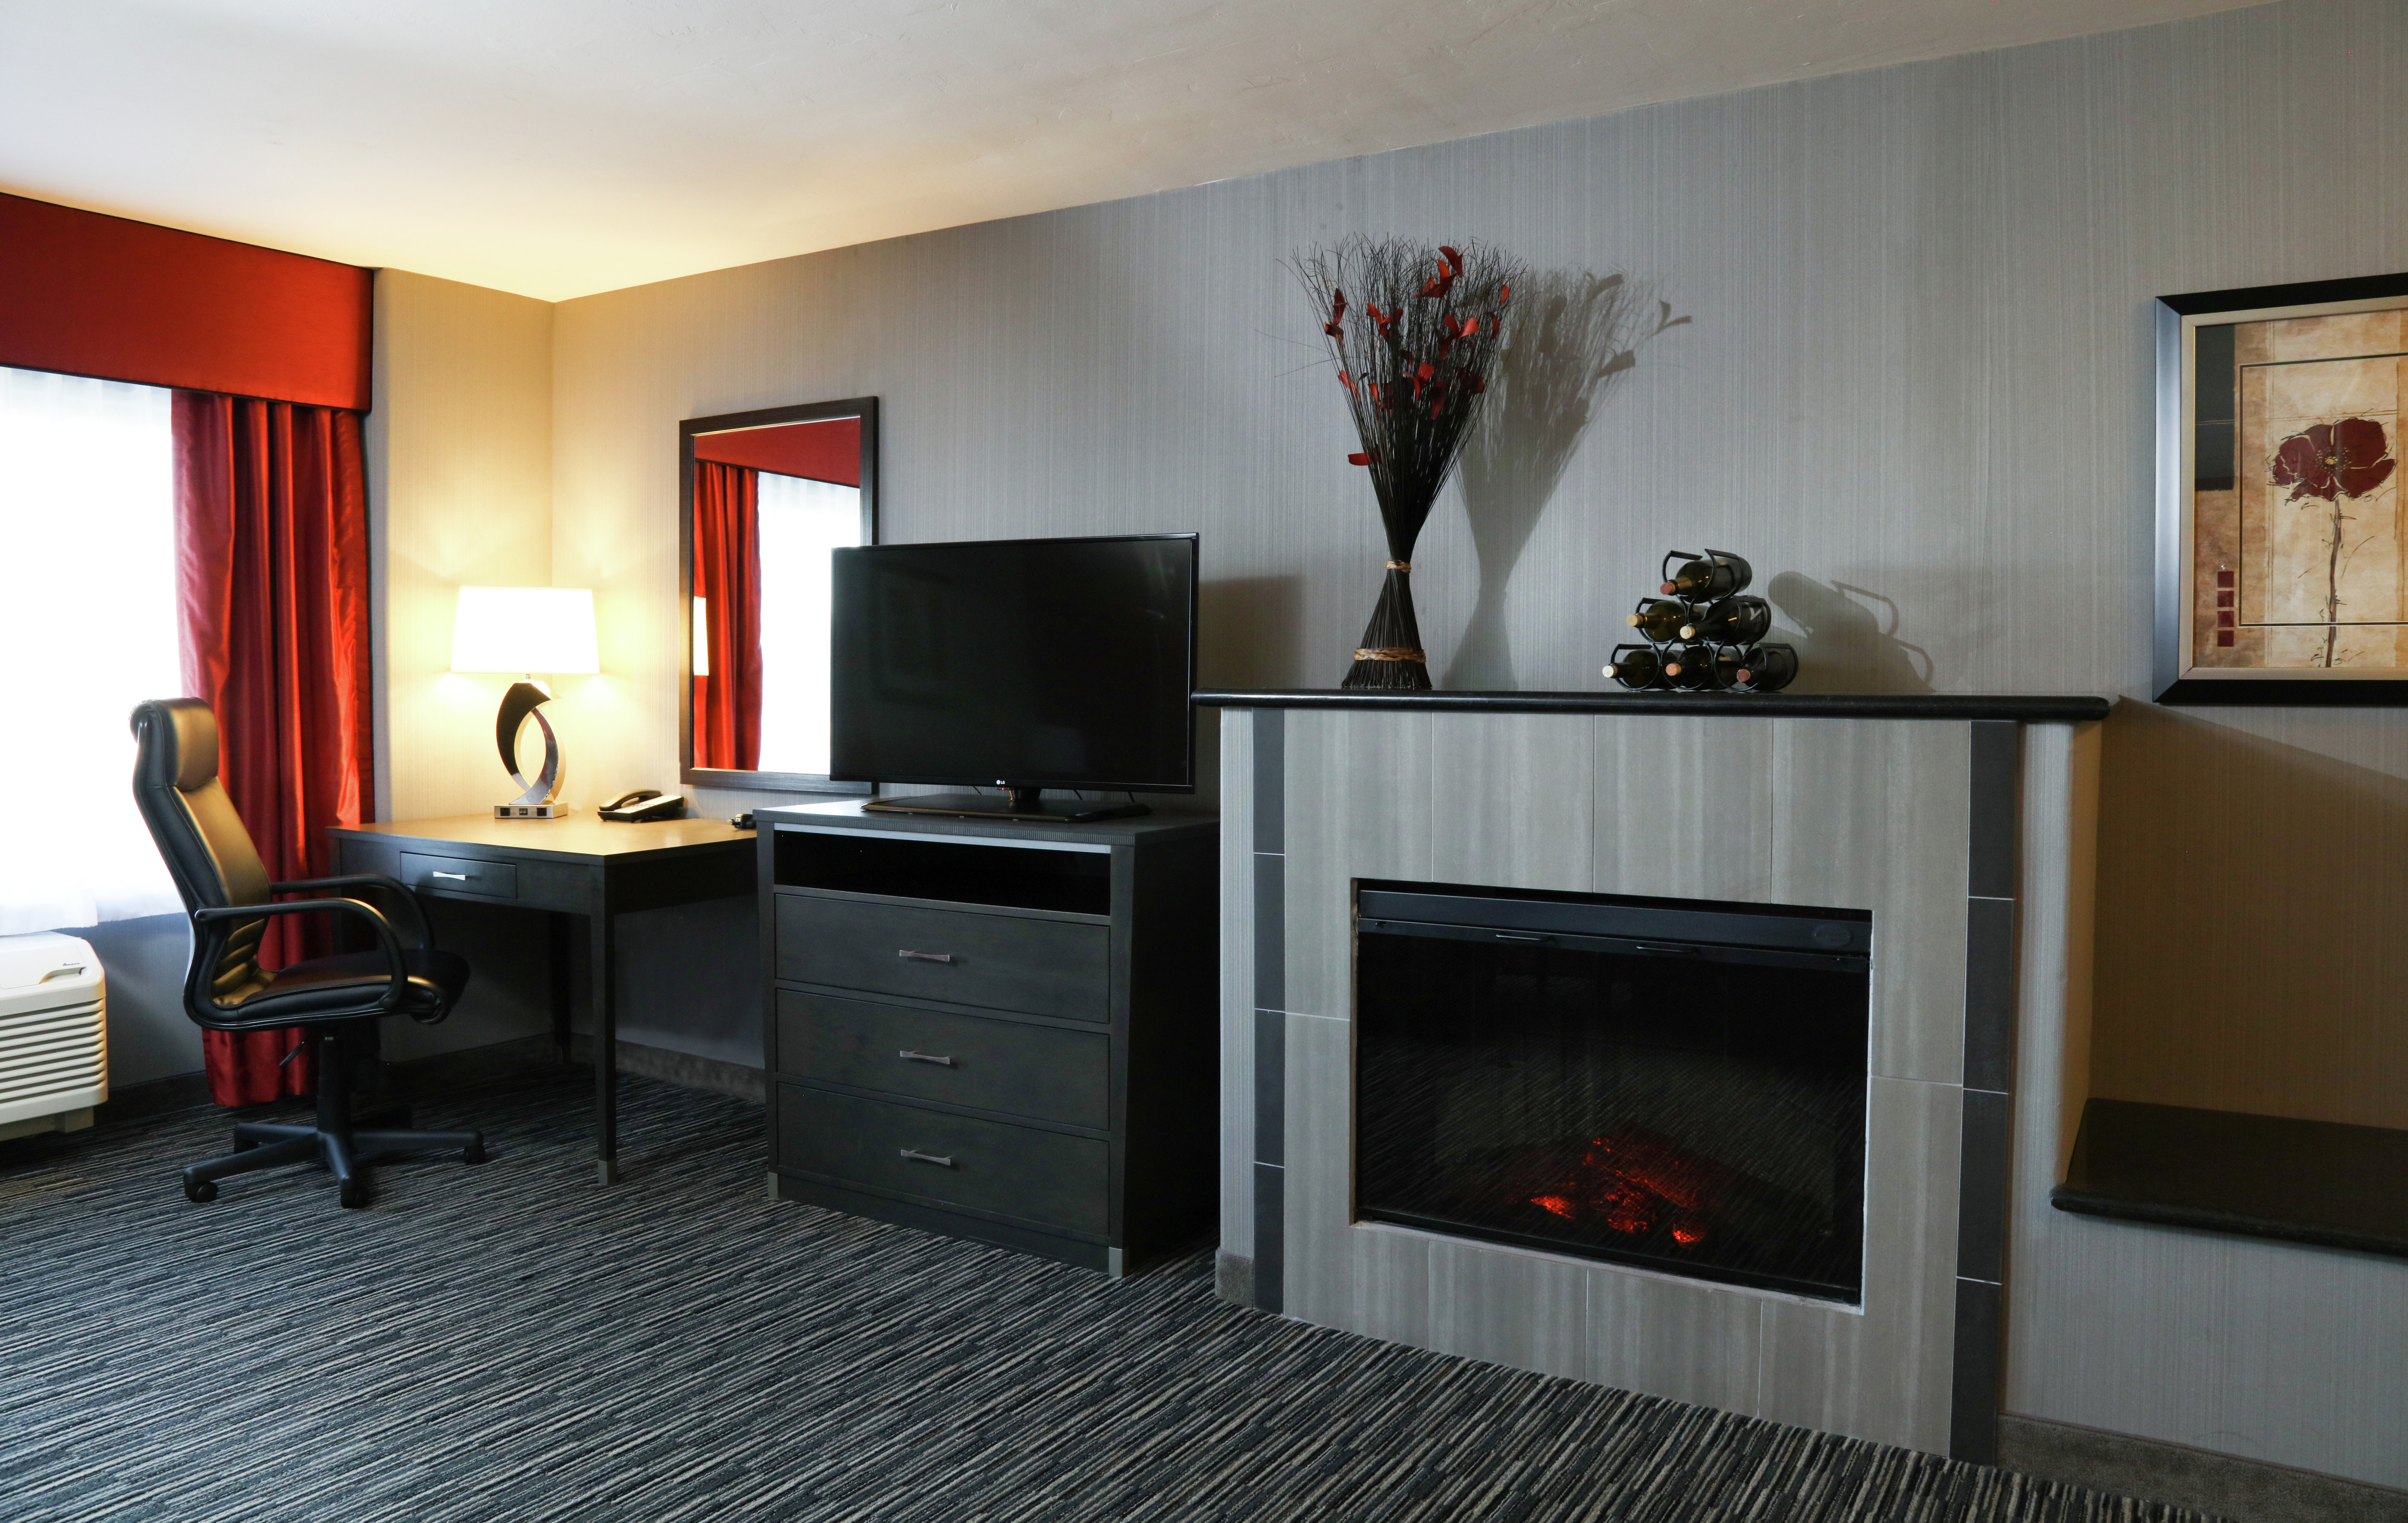 Accessible King Guestroom with Fireplace, Work Desk, and Room Technology